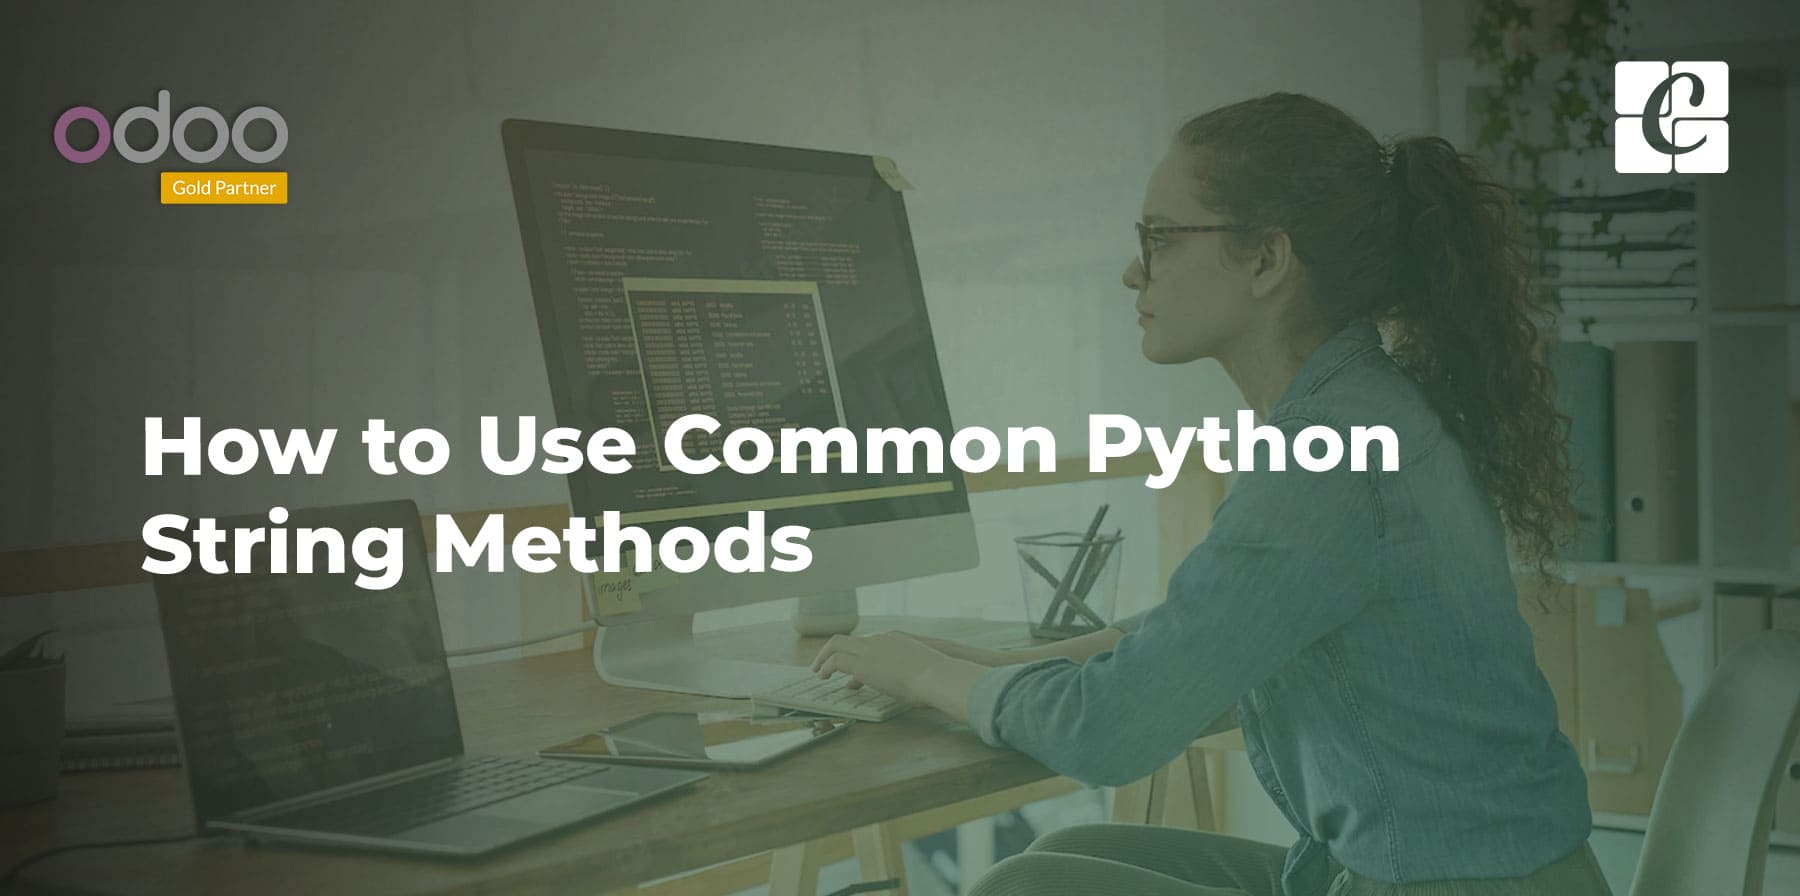 how-to-use-common-python-string-methods.jpg